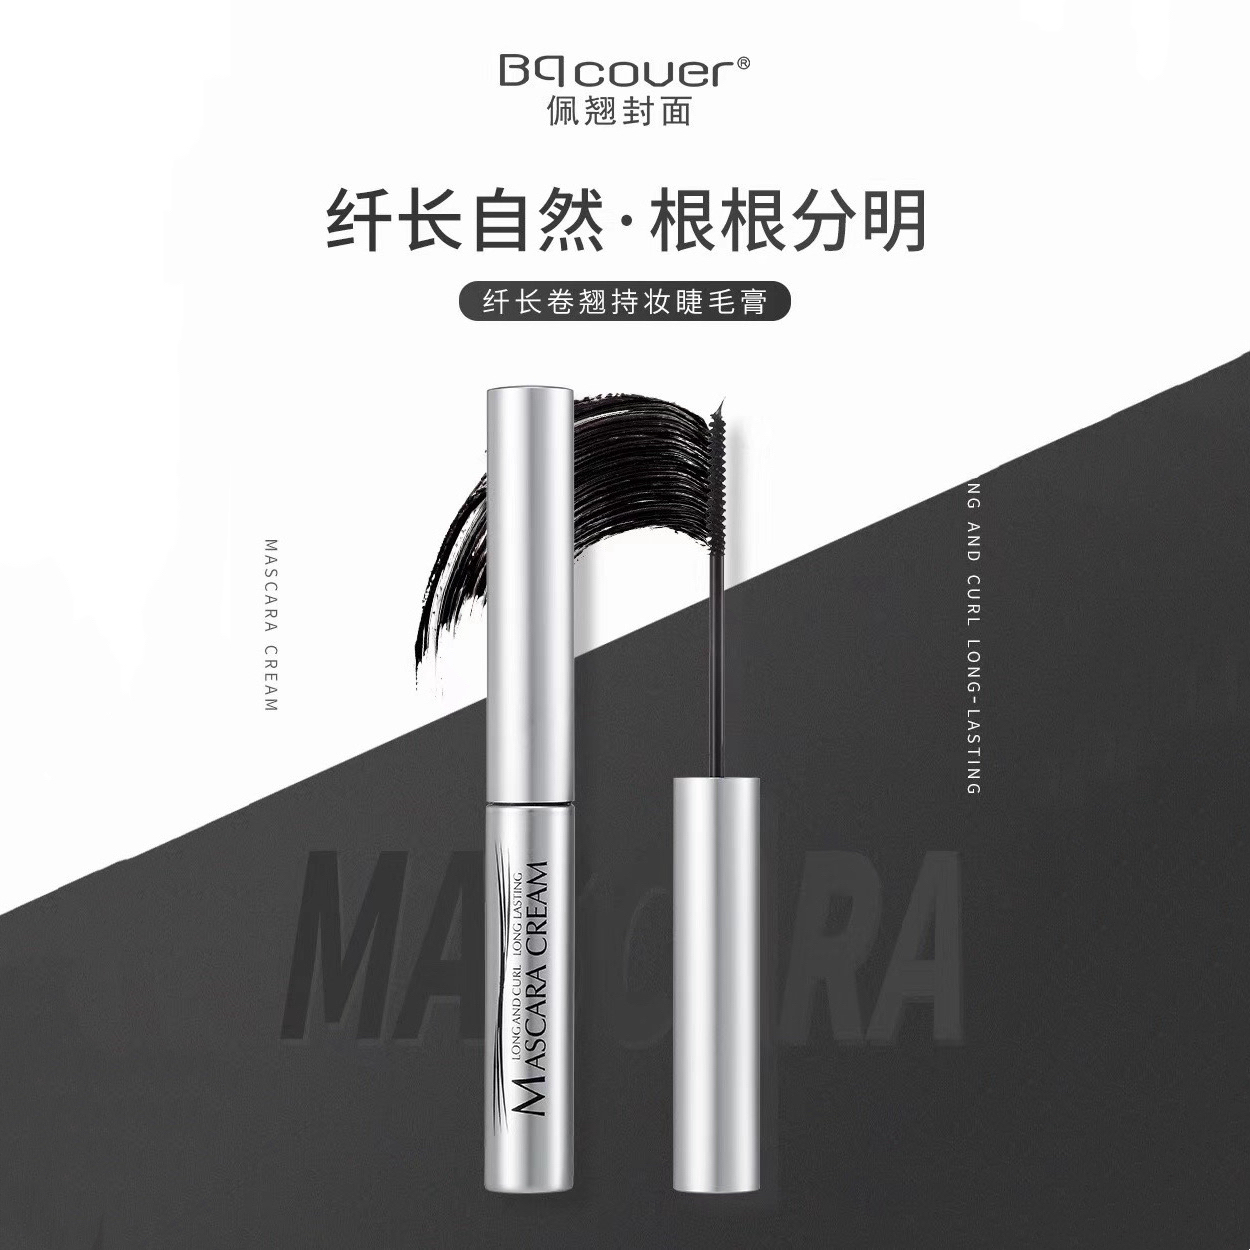 Bqcover佩翘封面2776纤长卷翘持妆睫毛膏3g上下均可2mm小刷头